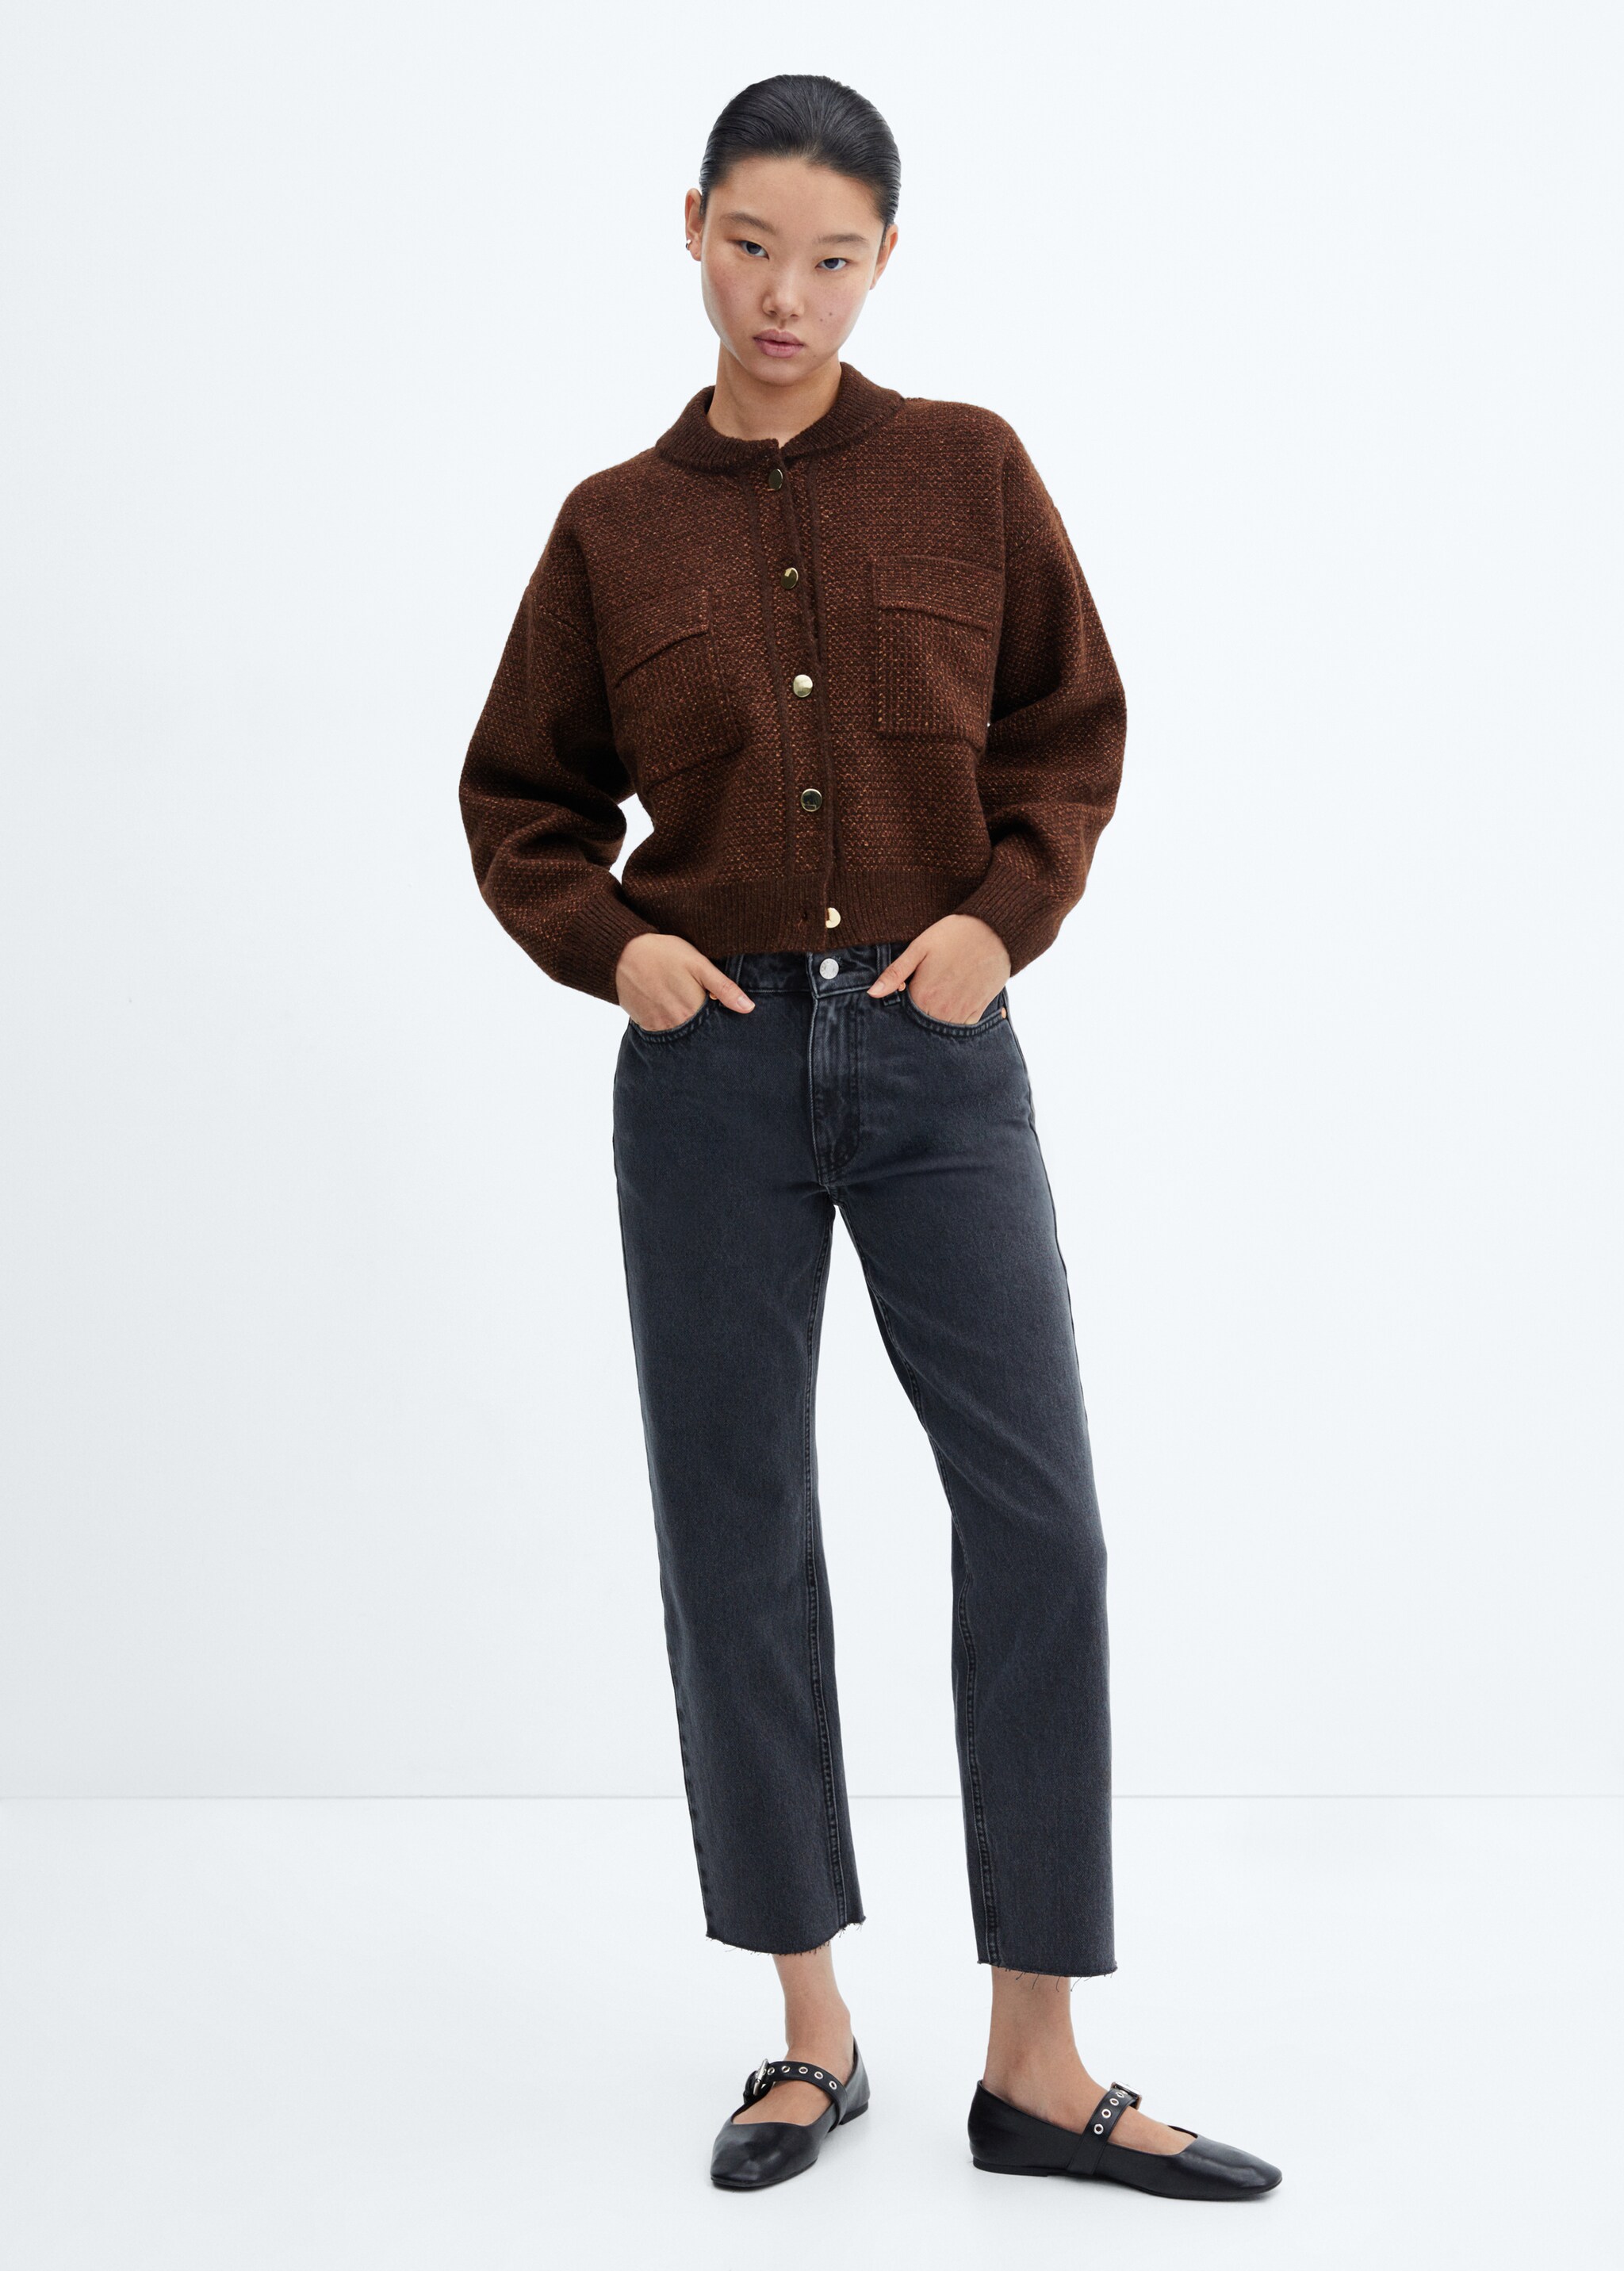 Bomber-style cardigan with pockets - General plane